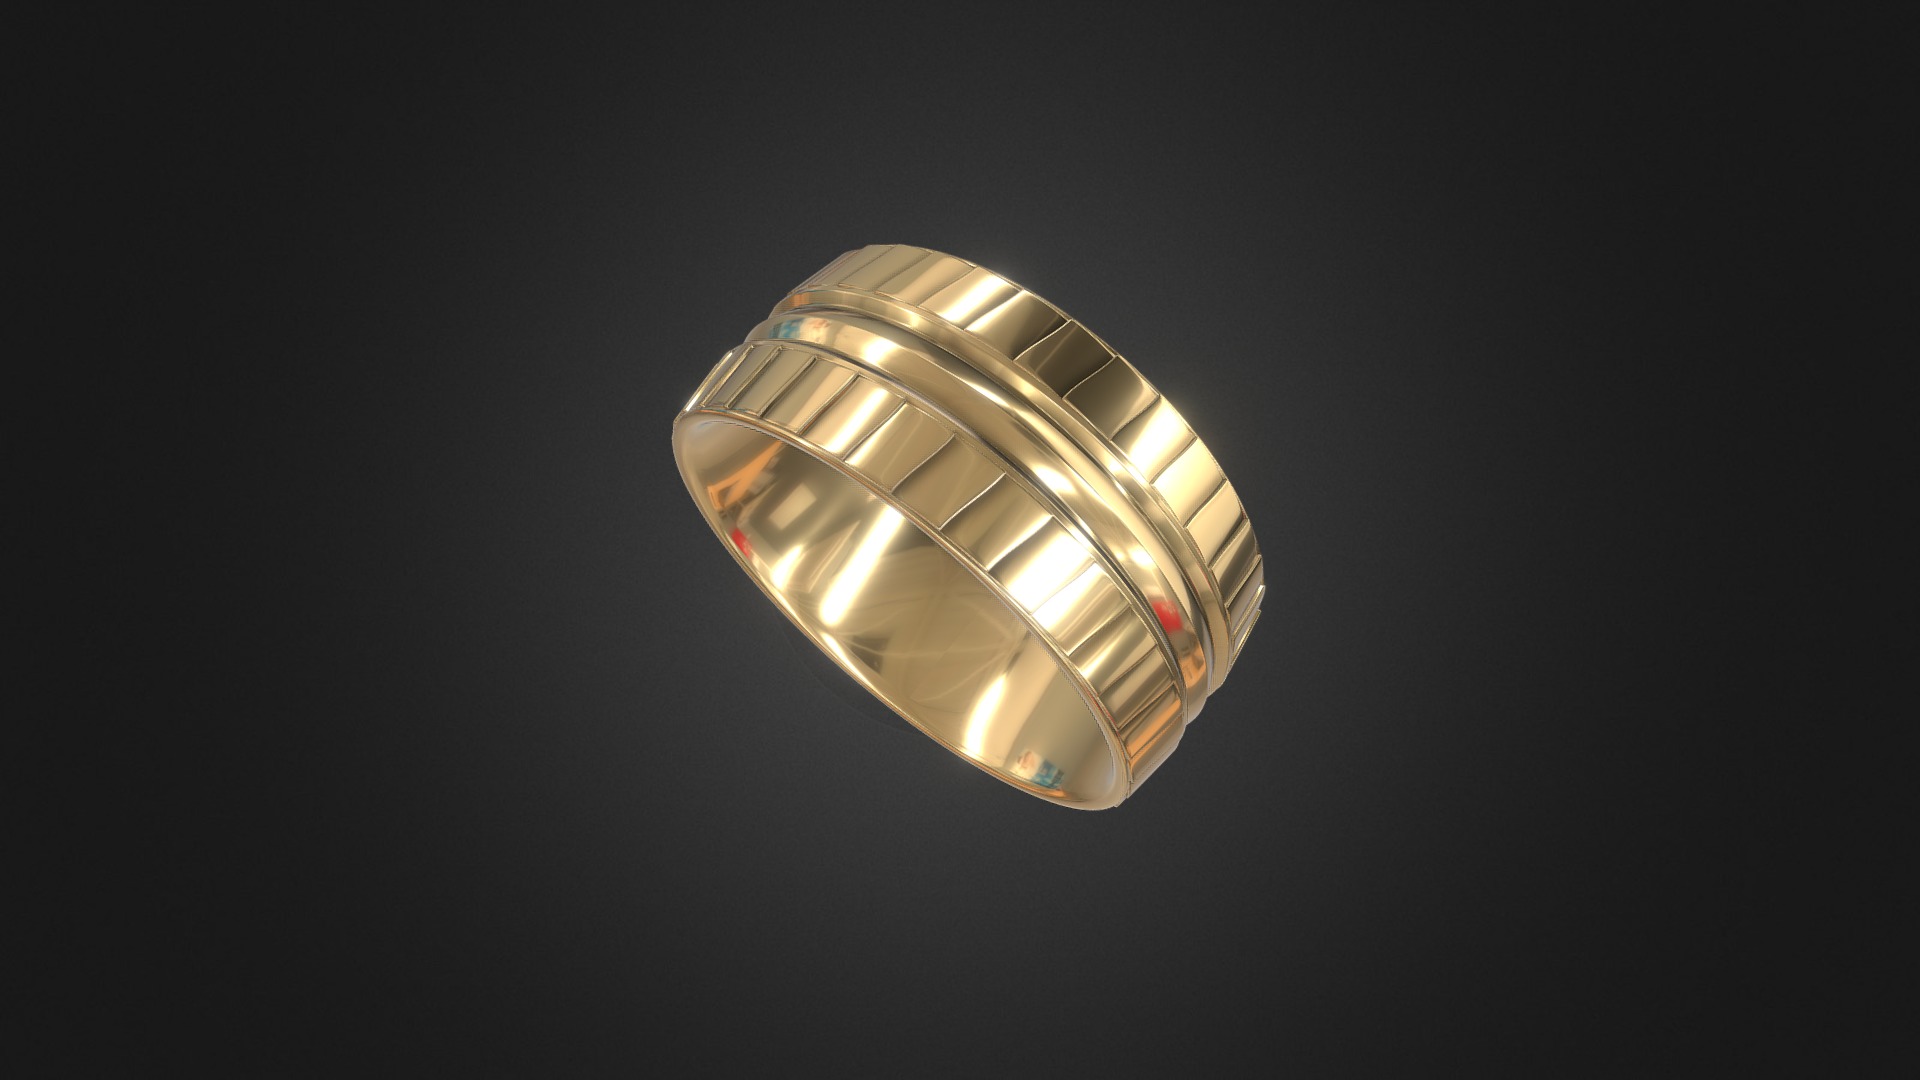 3D model 1136 – Ring - This is a 3D model of the 1136 - Ring. The 3D model is about a circular object with lights.